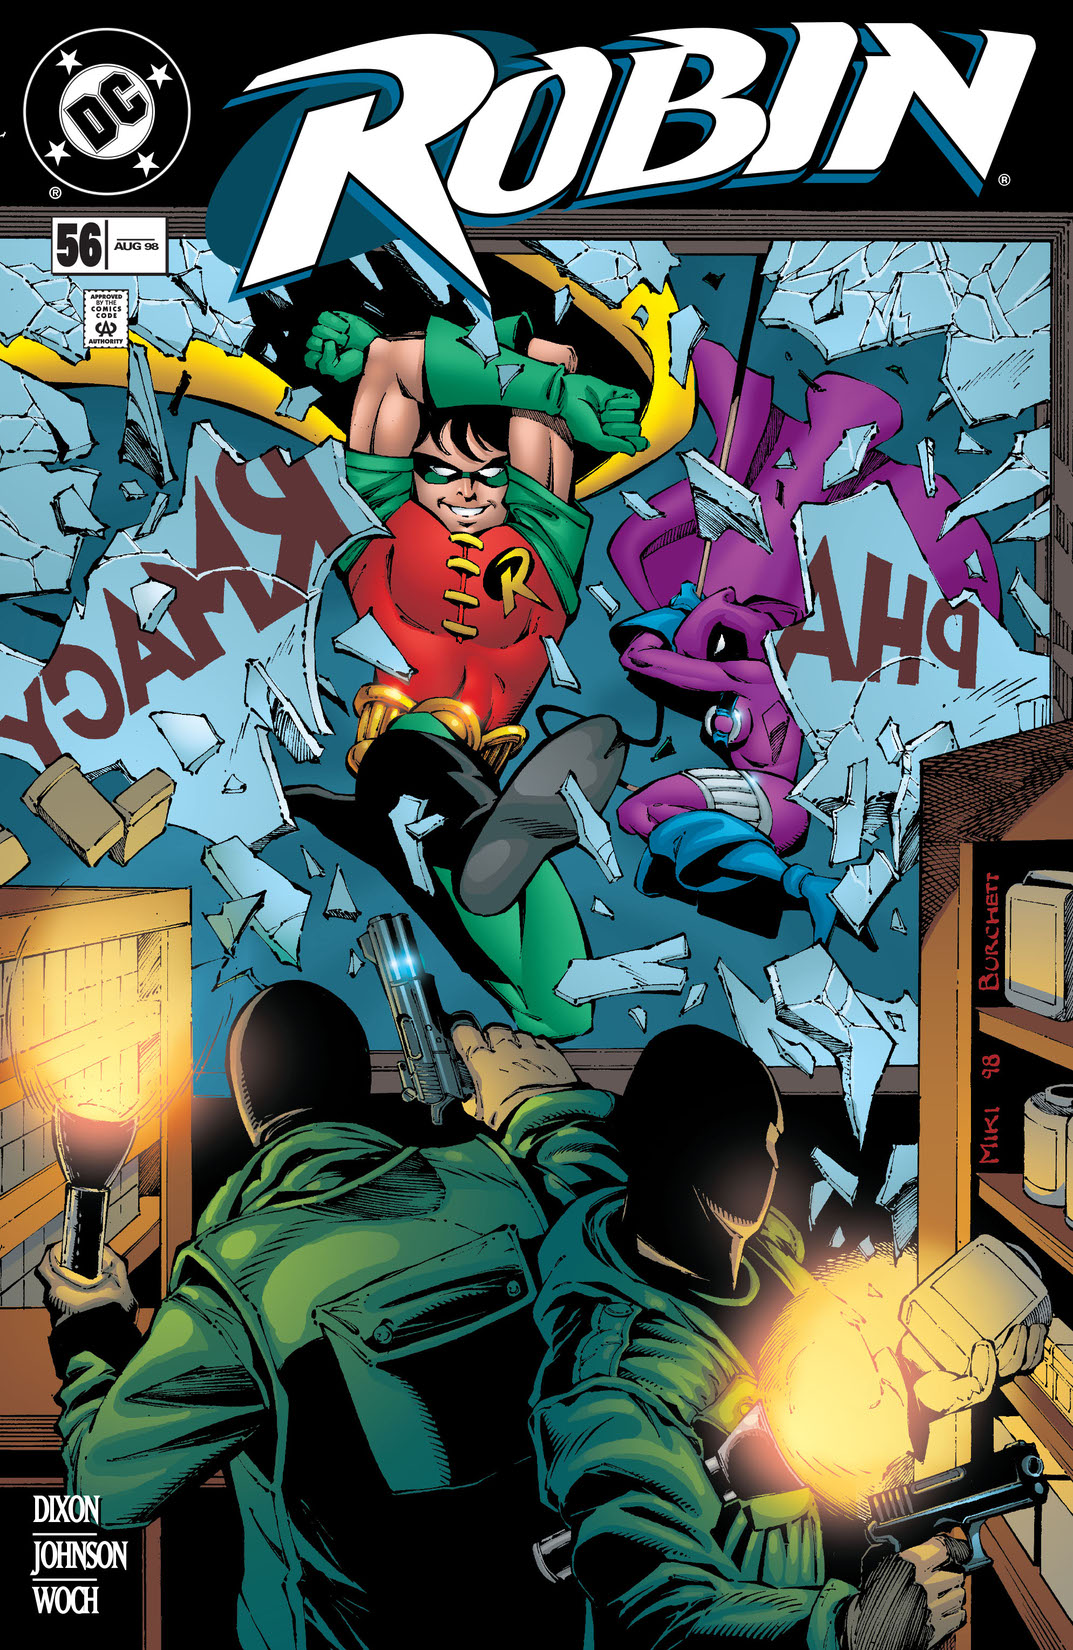 Robin (1993-) #56 preview images